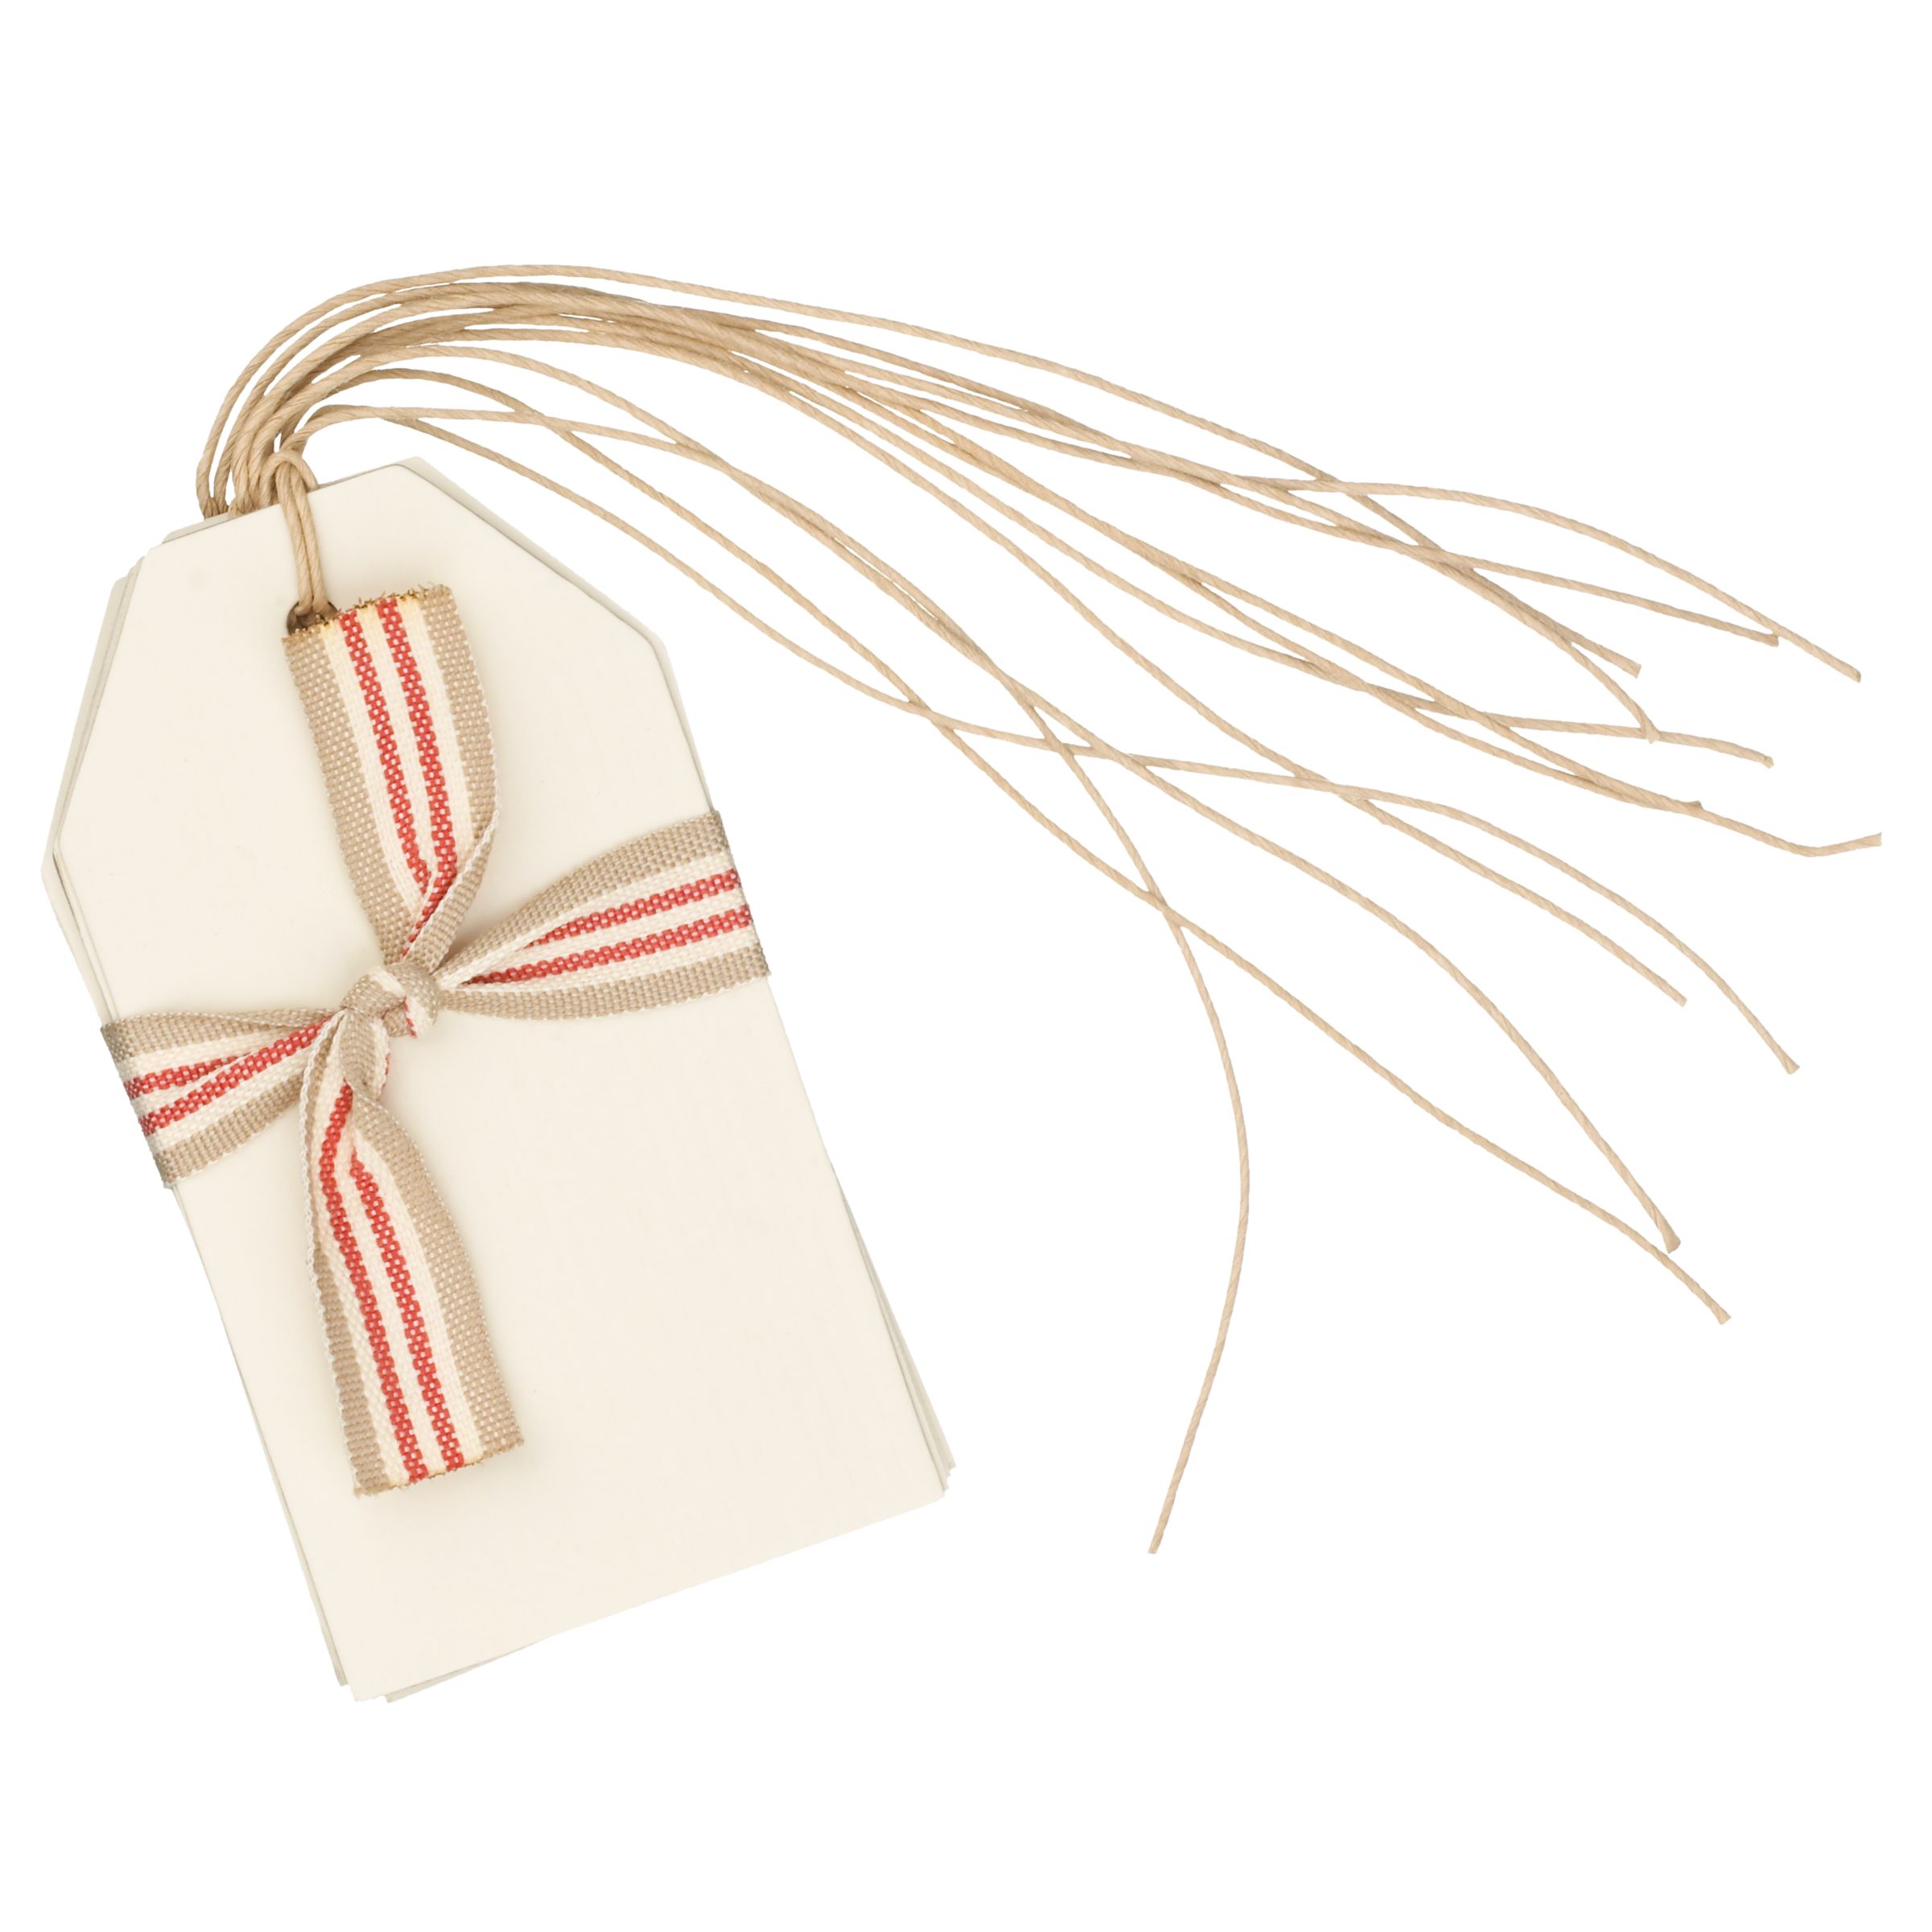 East of India Gift Tags, Cream, Set of 6 230555056